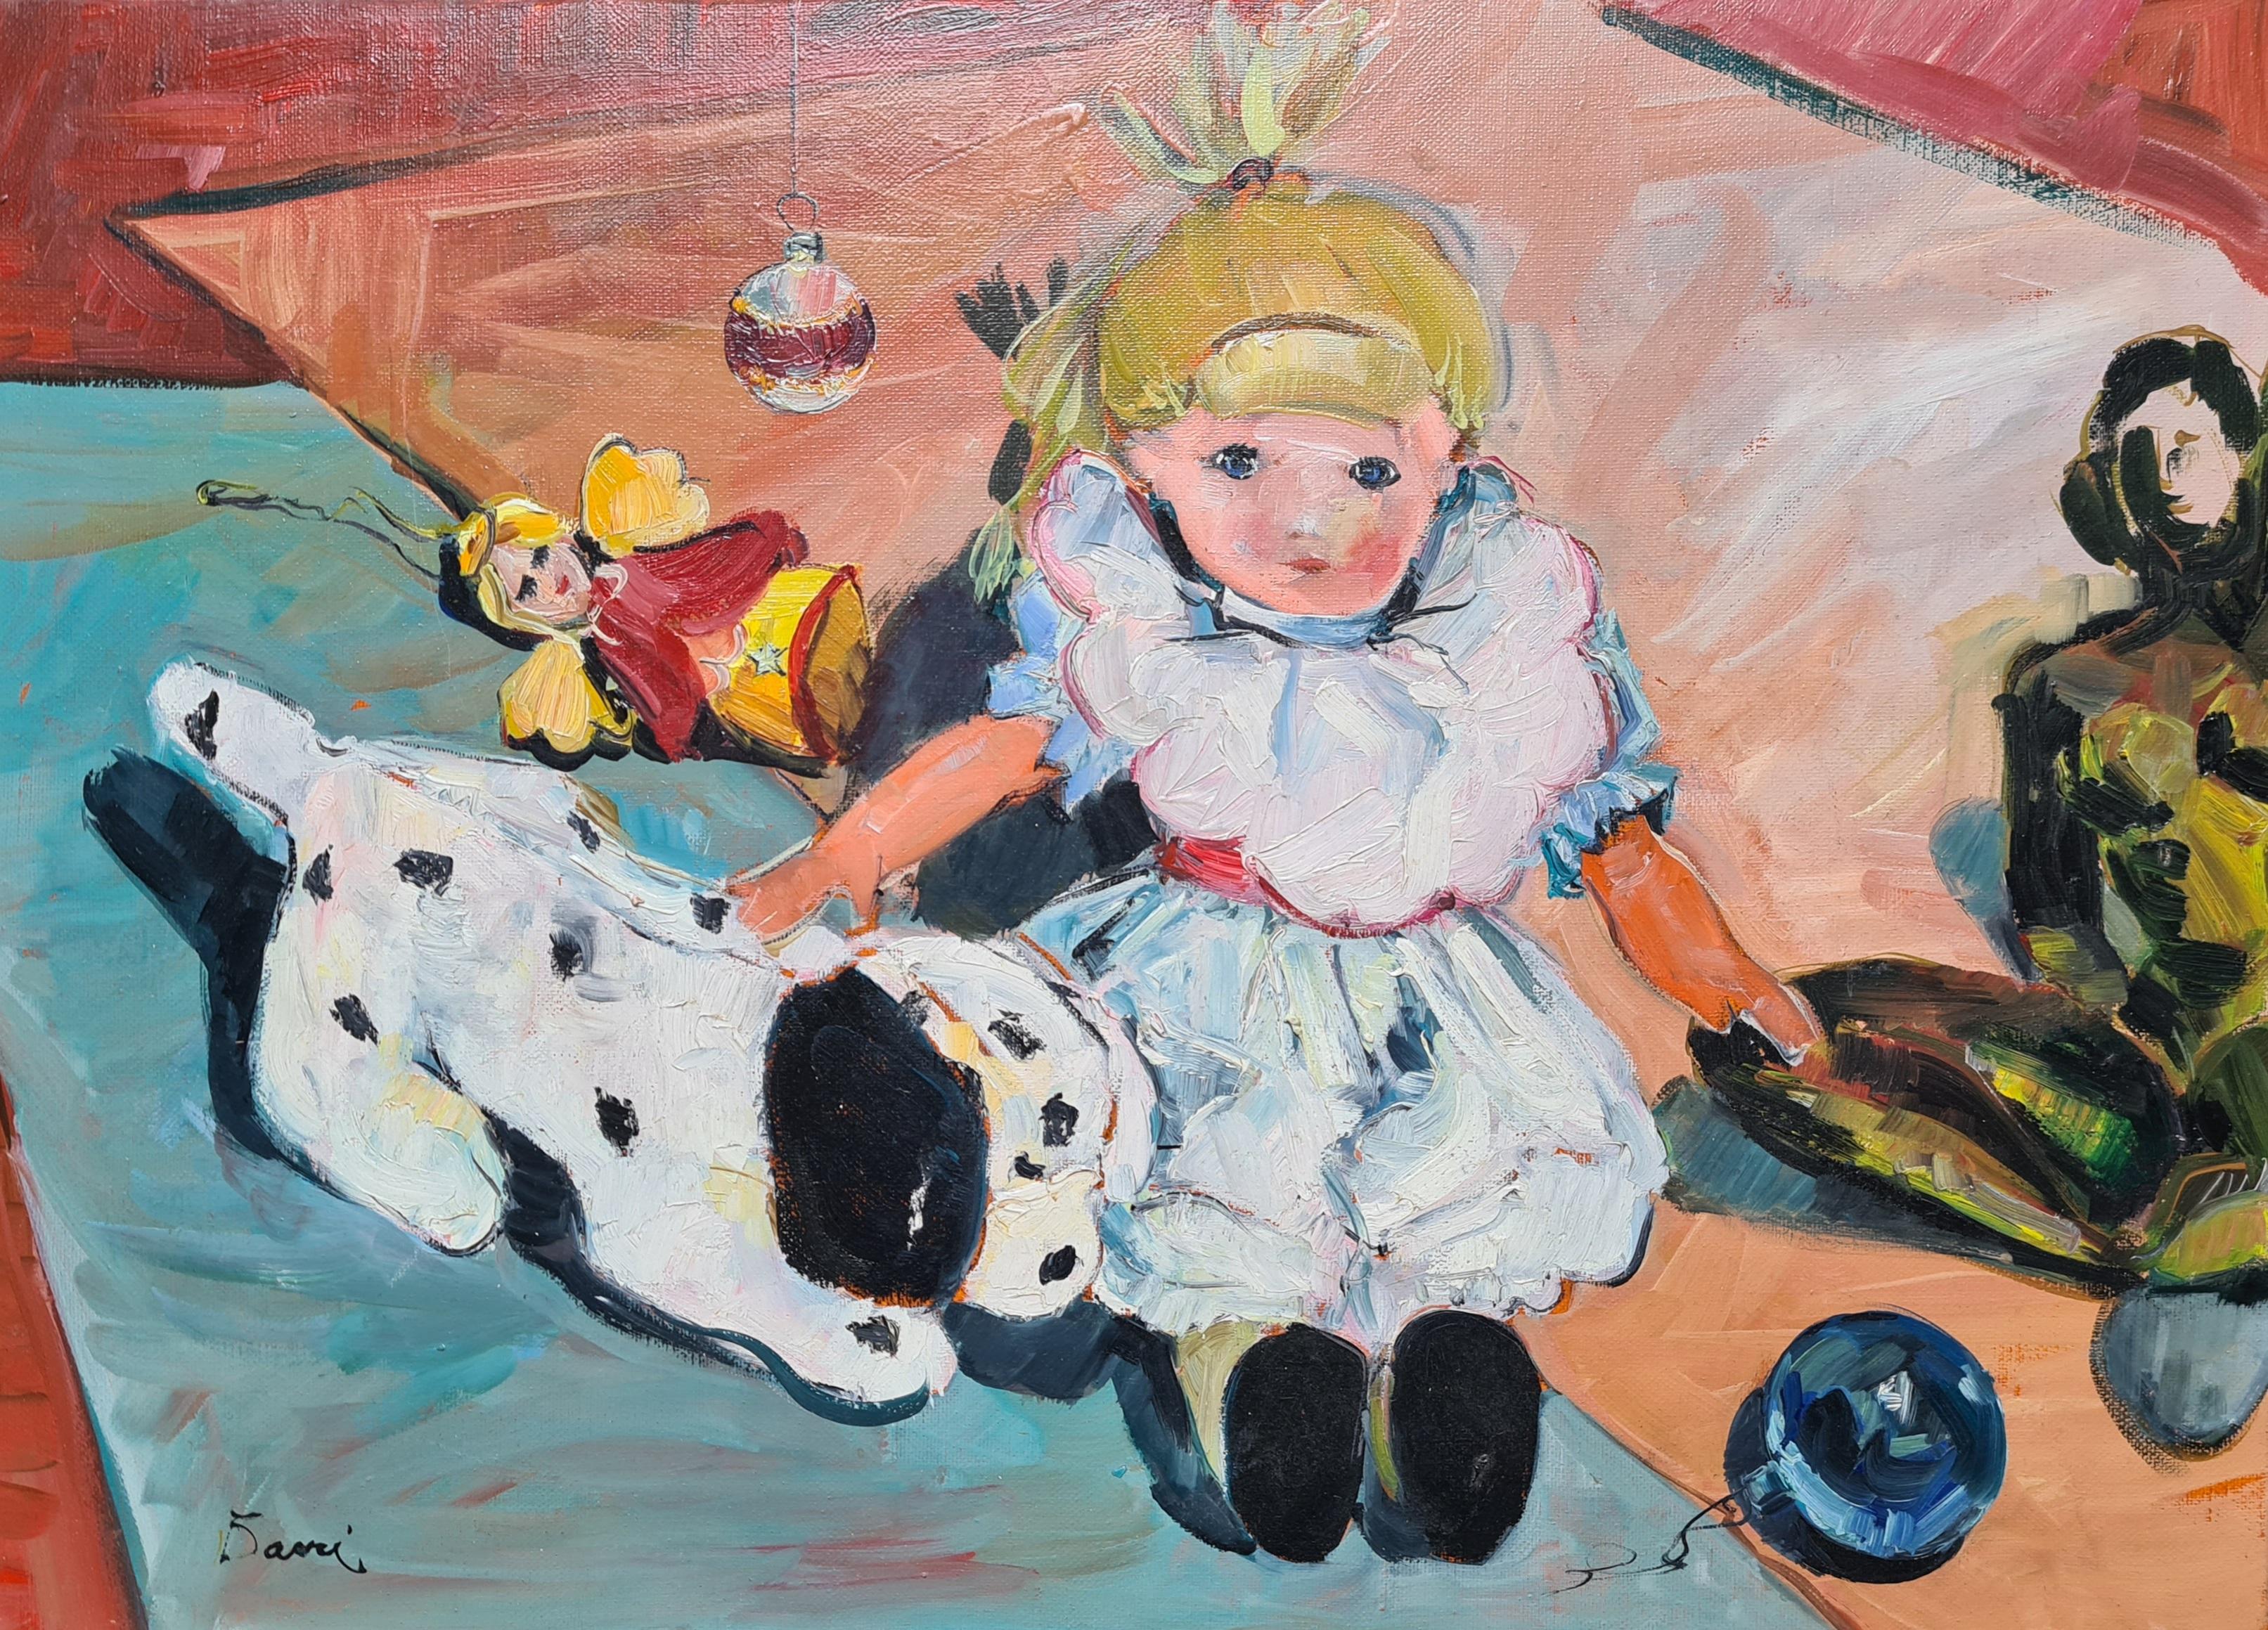 Unknown Figurative Painting - 'Christmas is a Coming', French Oil on Canvas Painting of Toys and Decorations.